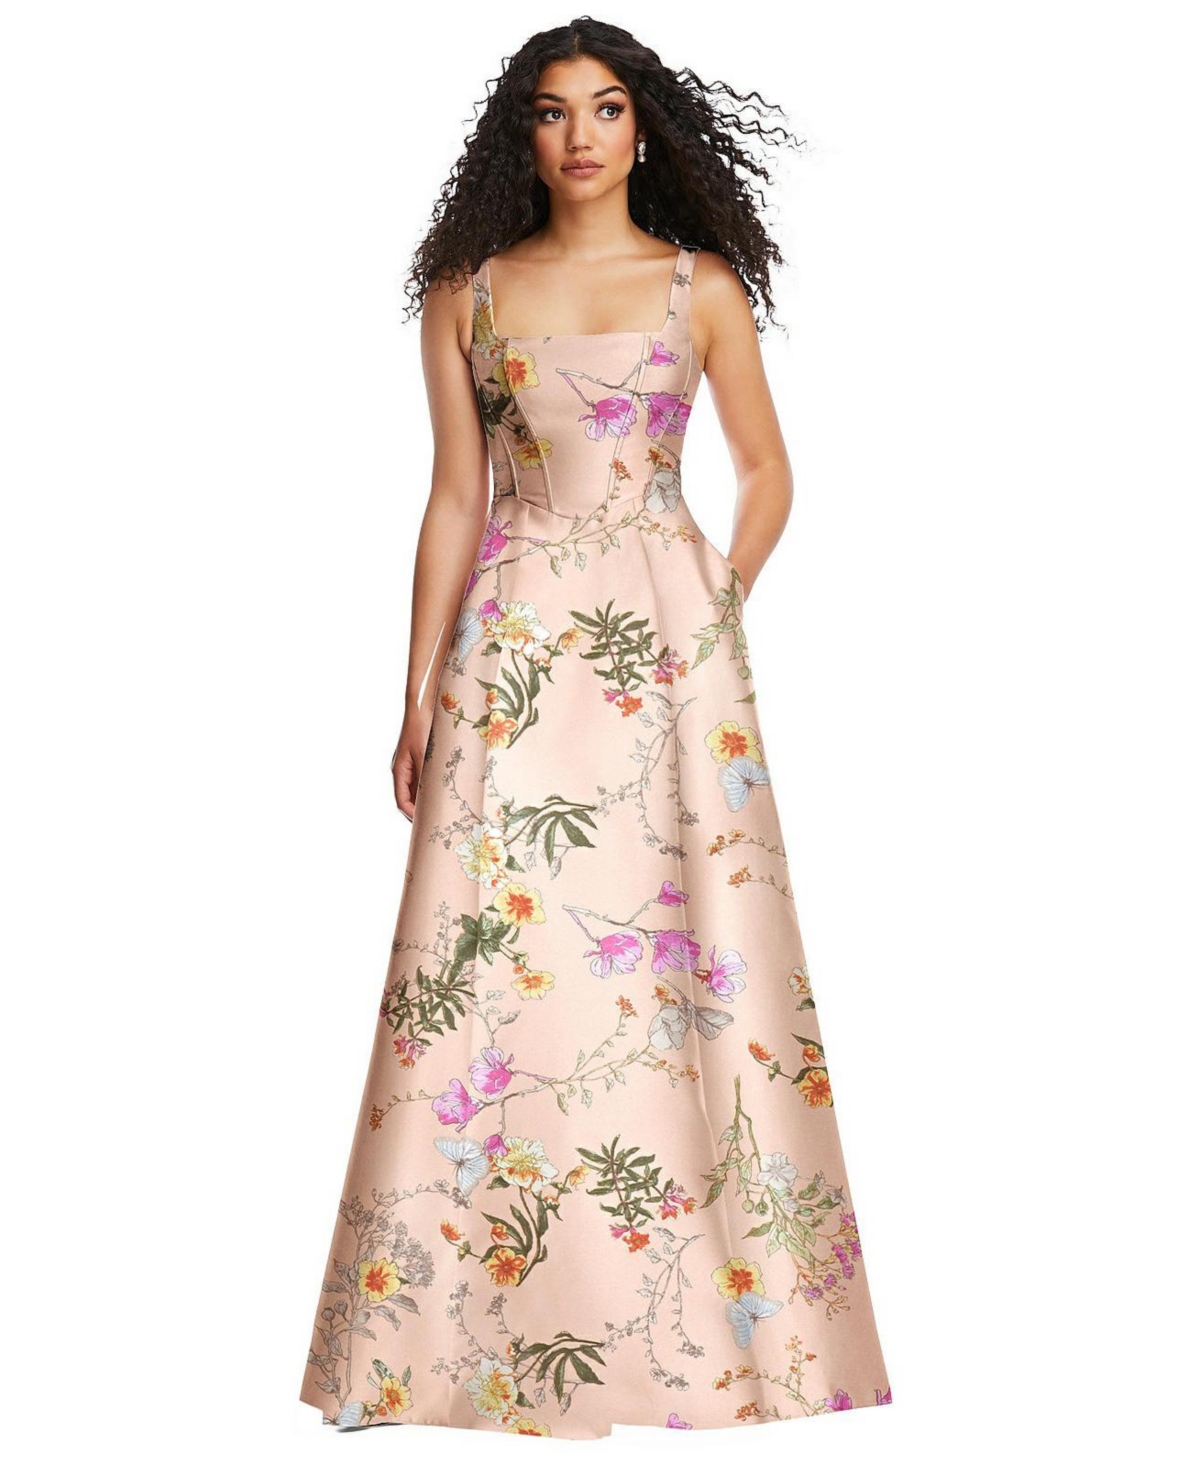 Womens Boned Corset Closed-Back Floral Satin Gown with Full Skirt - Butterfly botanica pink sand